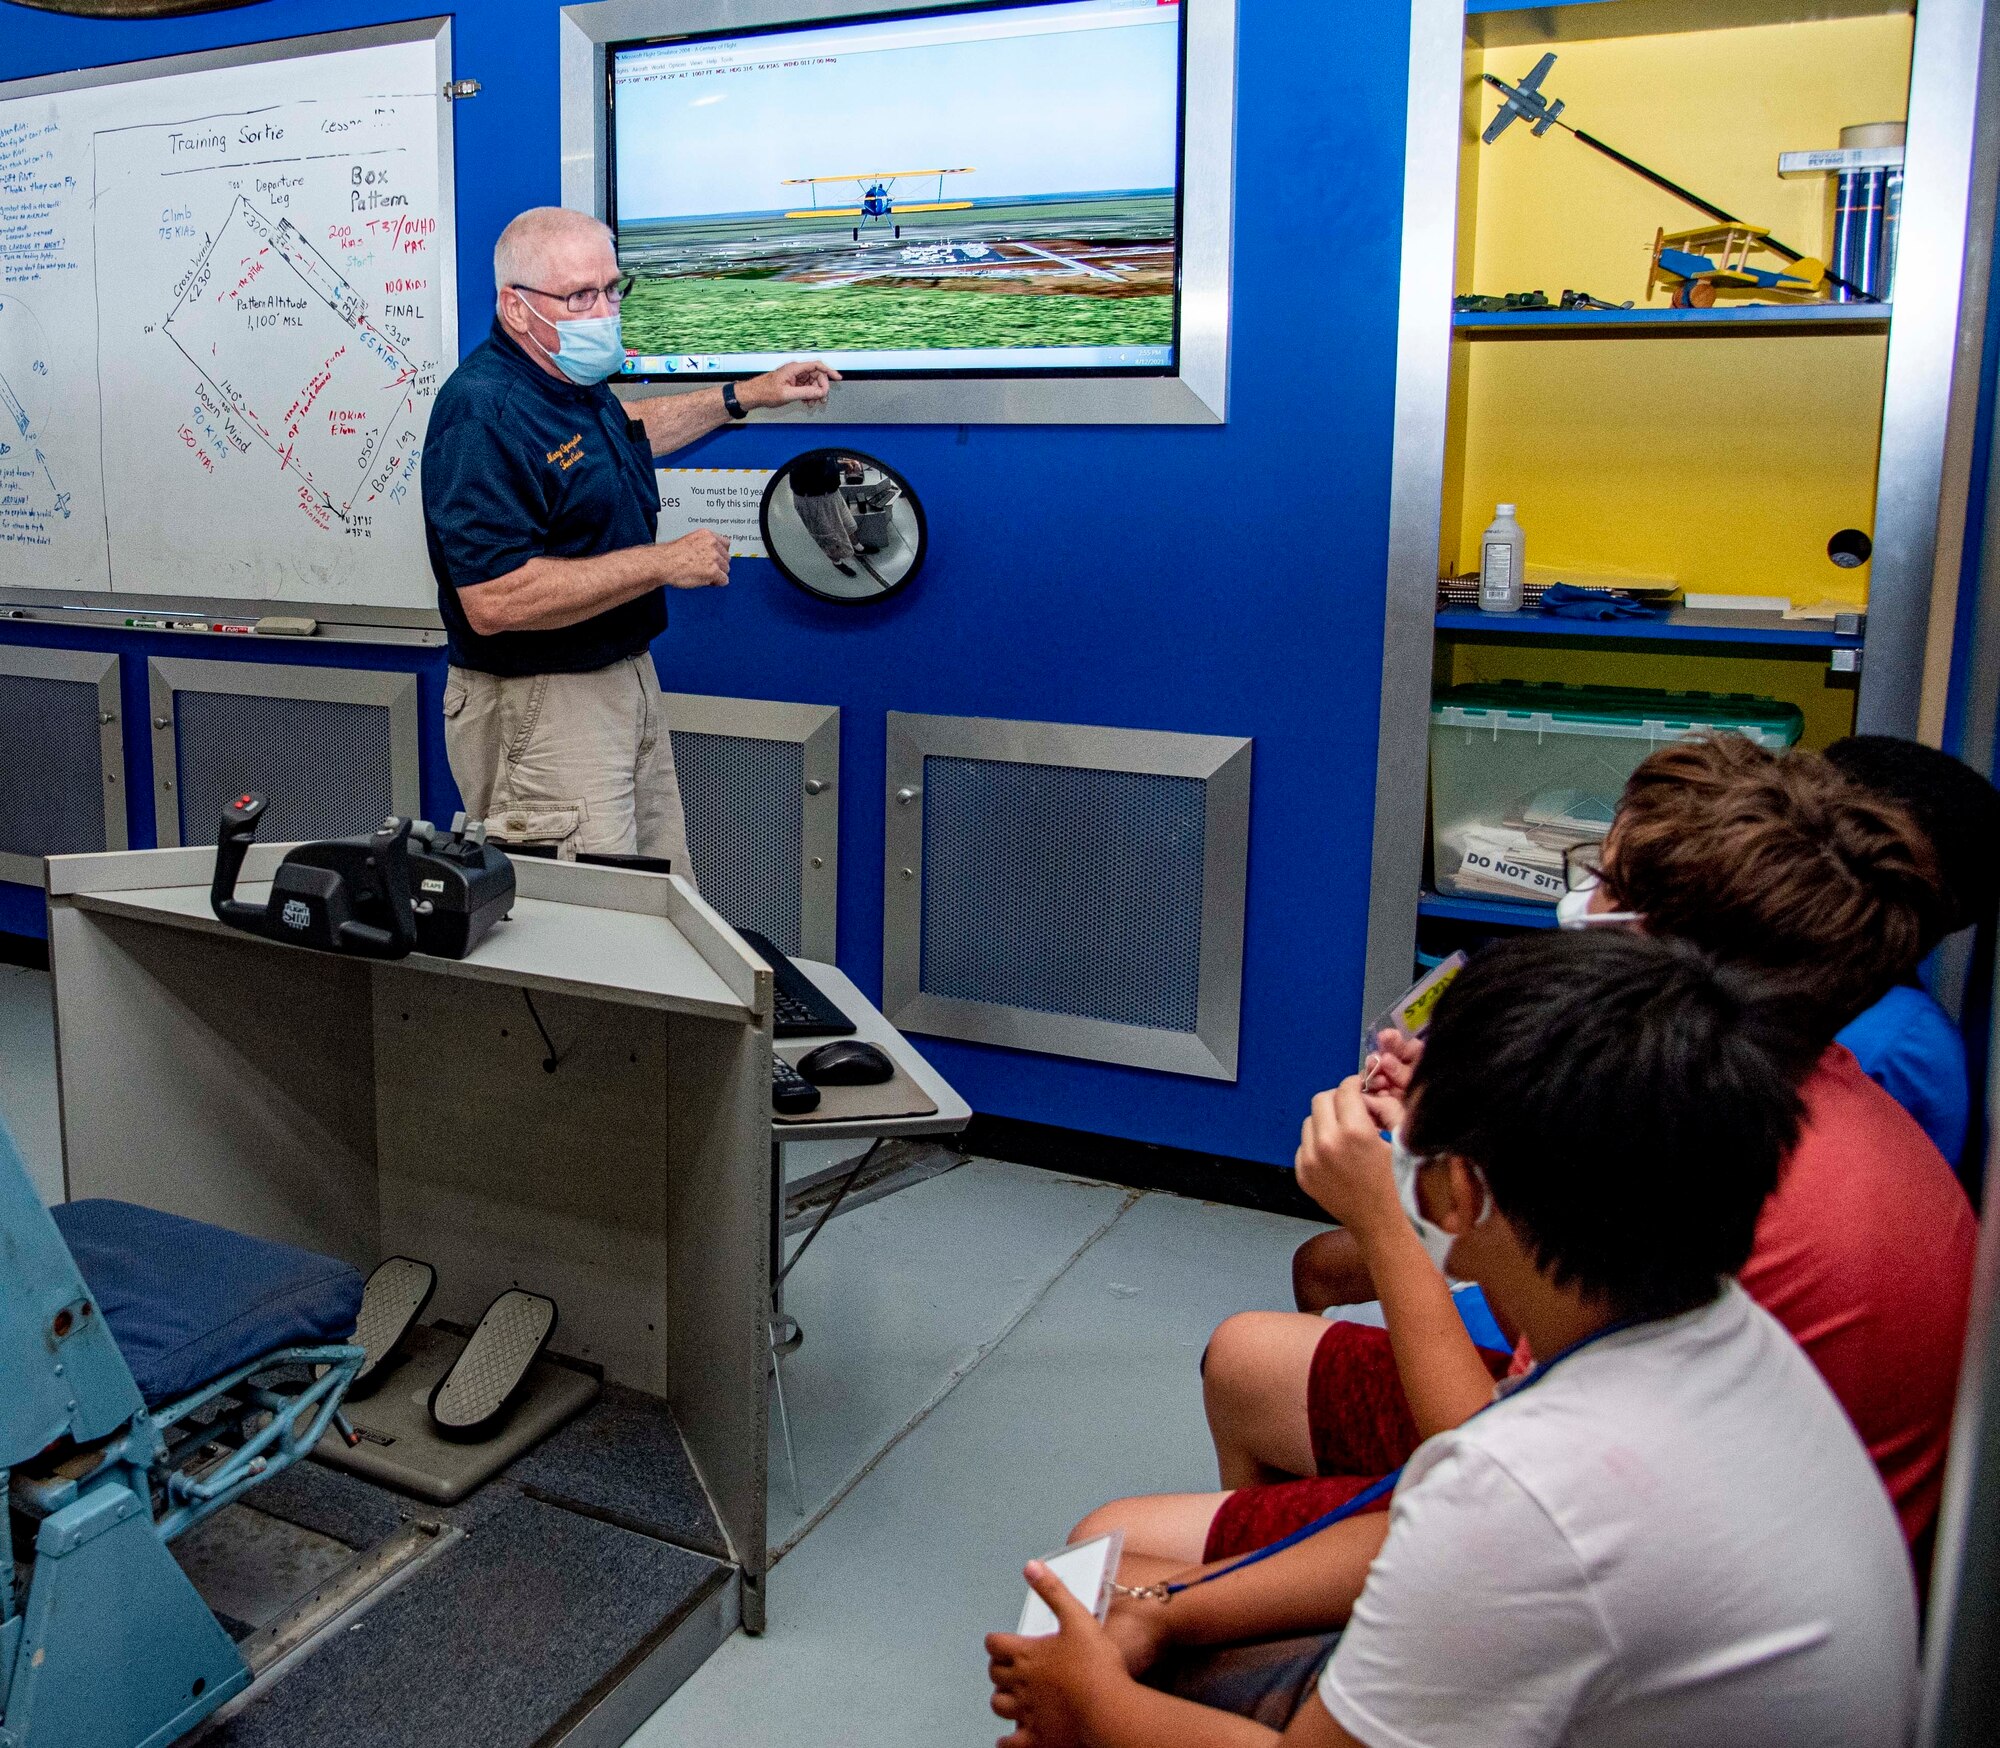 John Martin, Air Mobility Command Museum volunteer, explains to Summer Aviation Camp attendees how the flight simulator works at the AMC Museum on Dover Air Force Base, Delaware, Aug. 10, 2021. The attendees had the opportunity to fly a simulated Stearman Aircraft, fly in a Cessna with the Dover AFB Aero Club and interview Airmen and retirees and learn more about the military. This year’s summer camp utilized Quonset Hut classrooms created during last year’s pandemic and can also be used by homeschooling parents. (U.S. Air Force photo by Tech. Sgt. Nicole Leidholm)